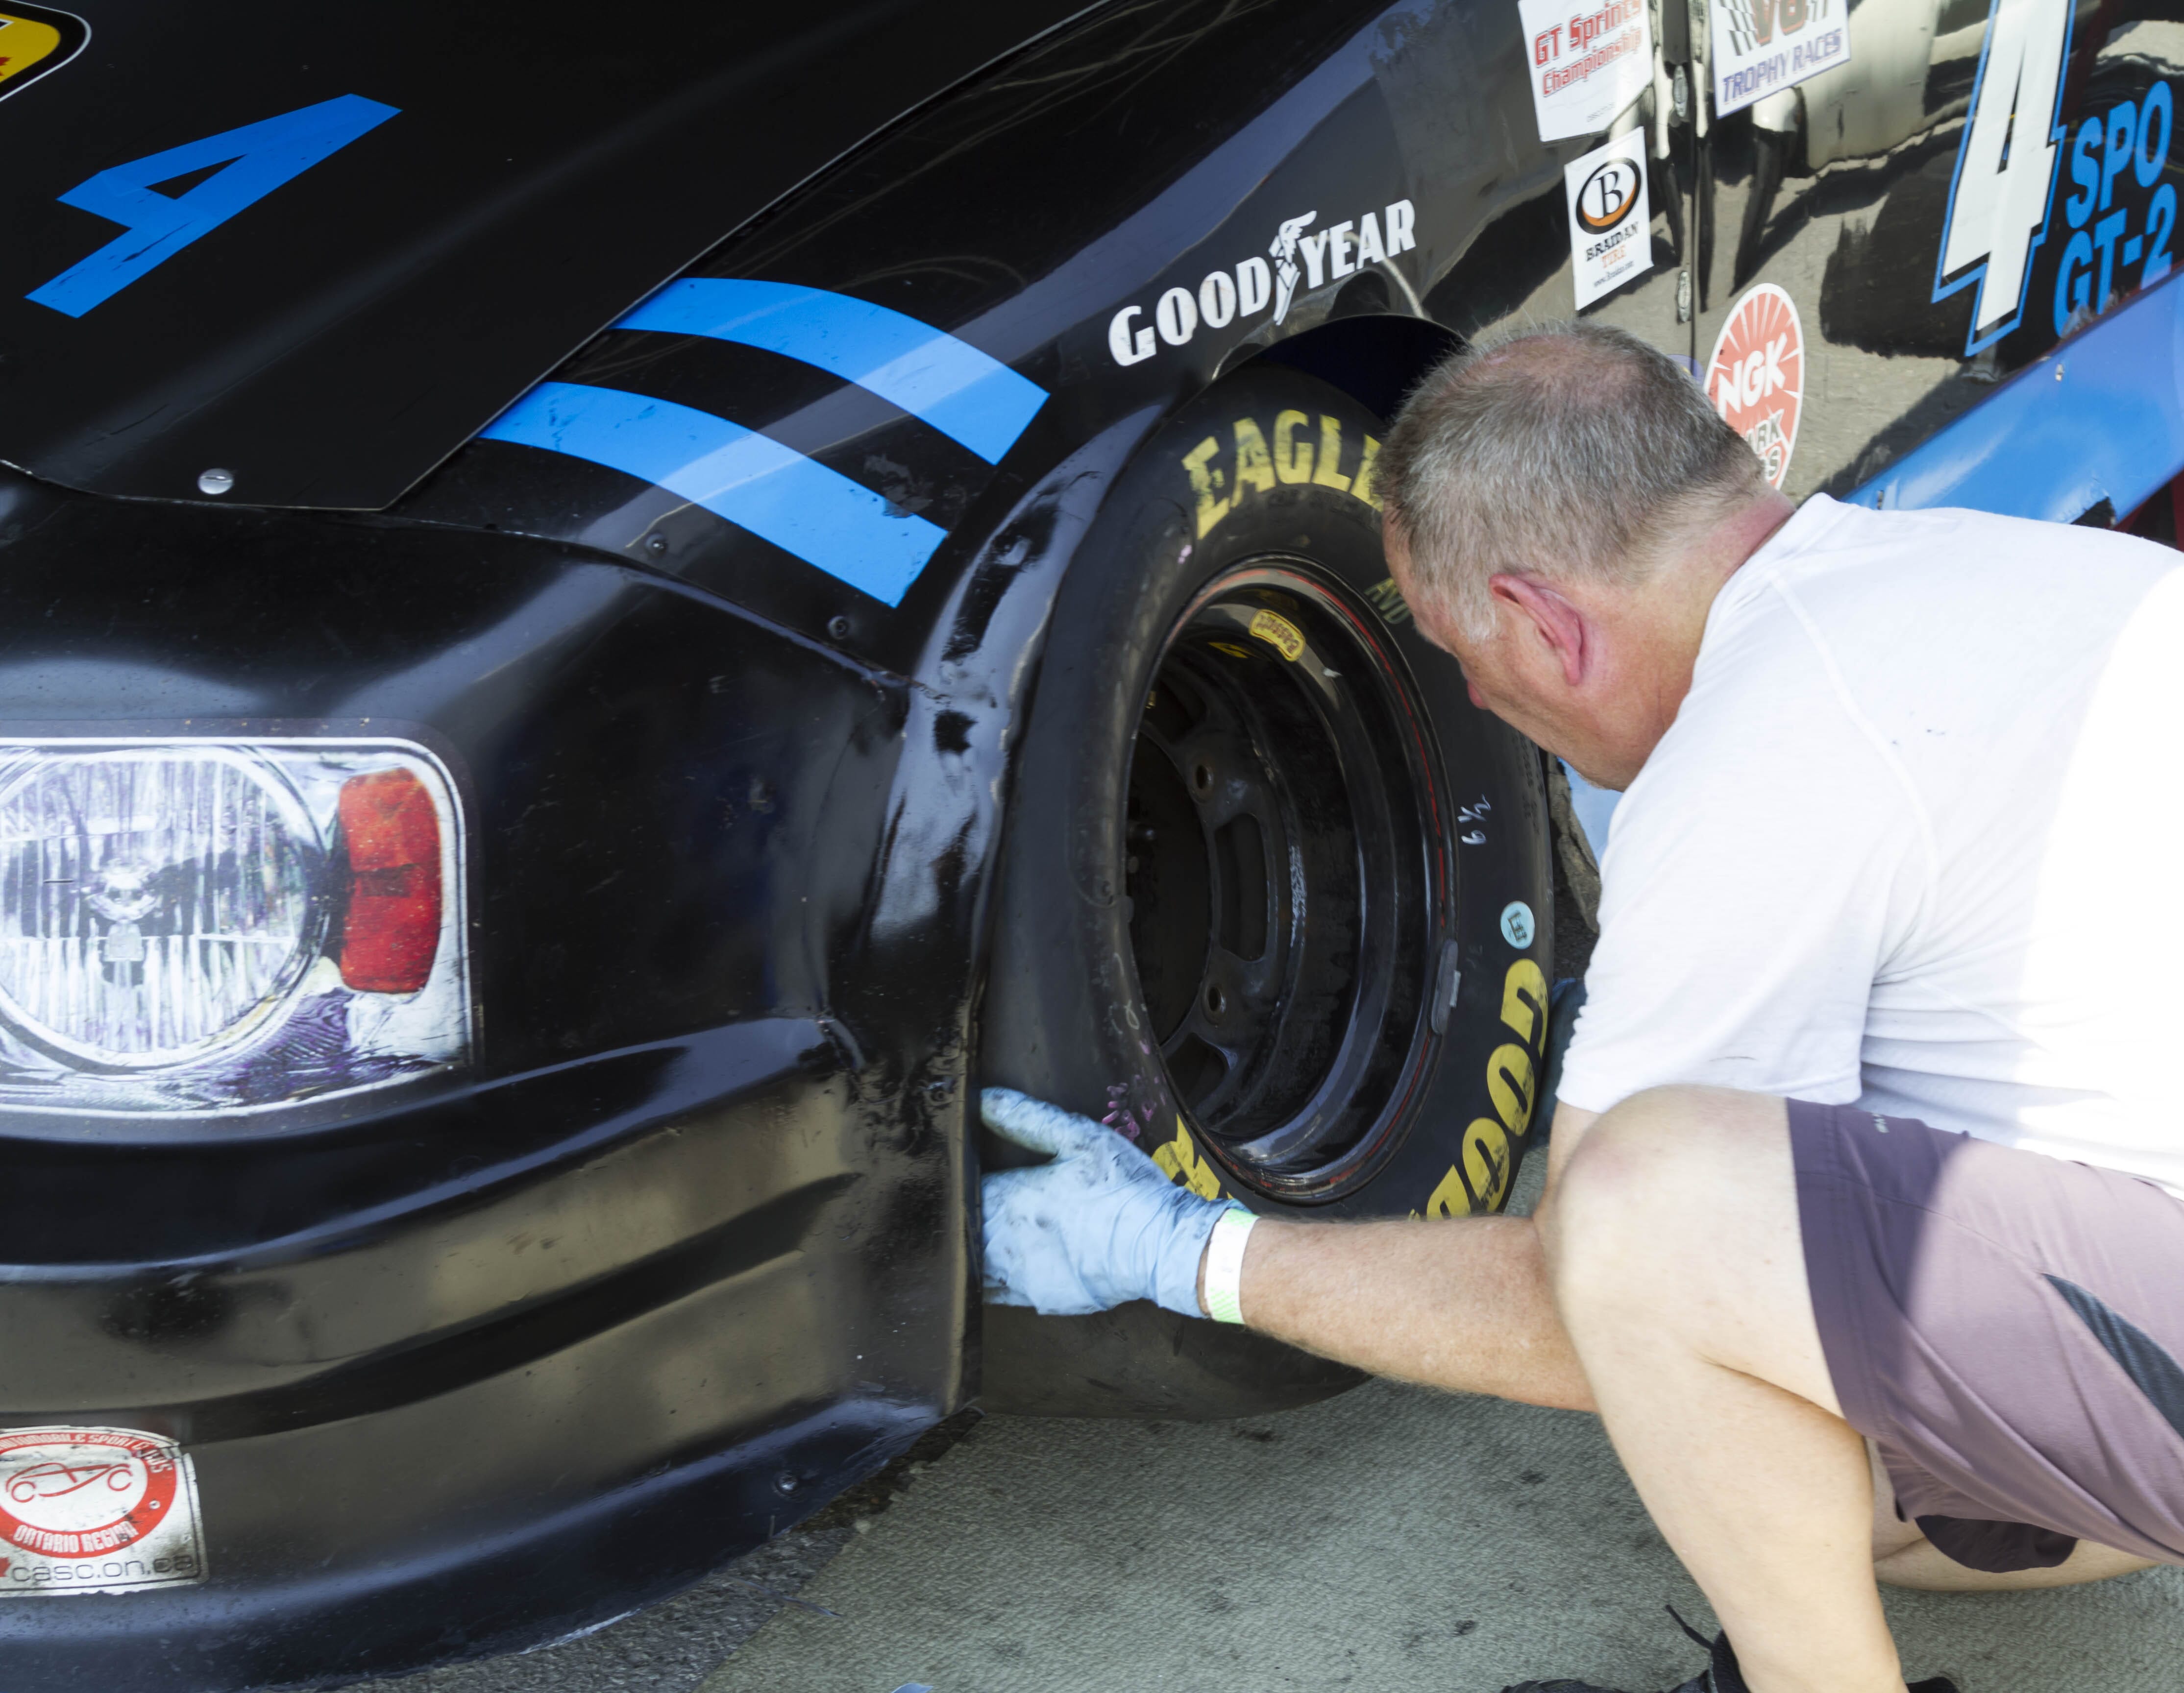 Chris is his own pit crew, seen here changing a tire before the race.